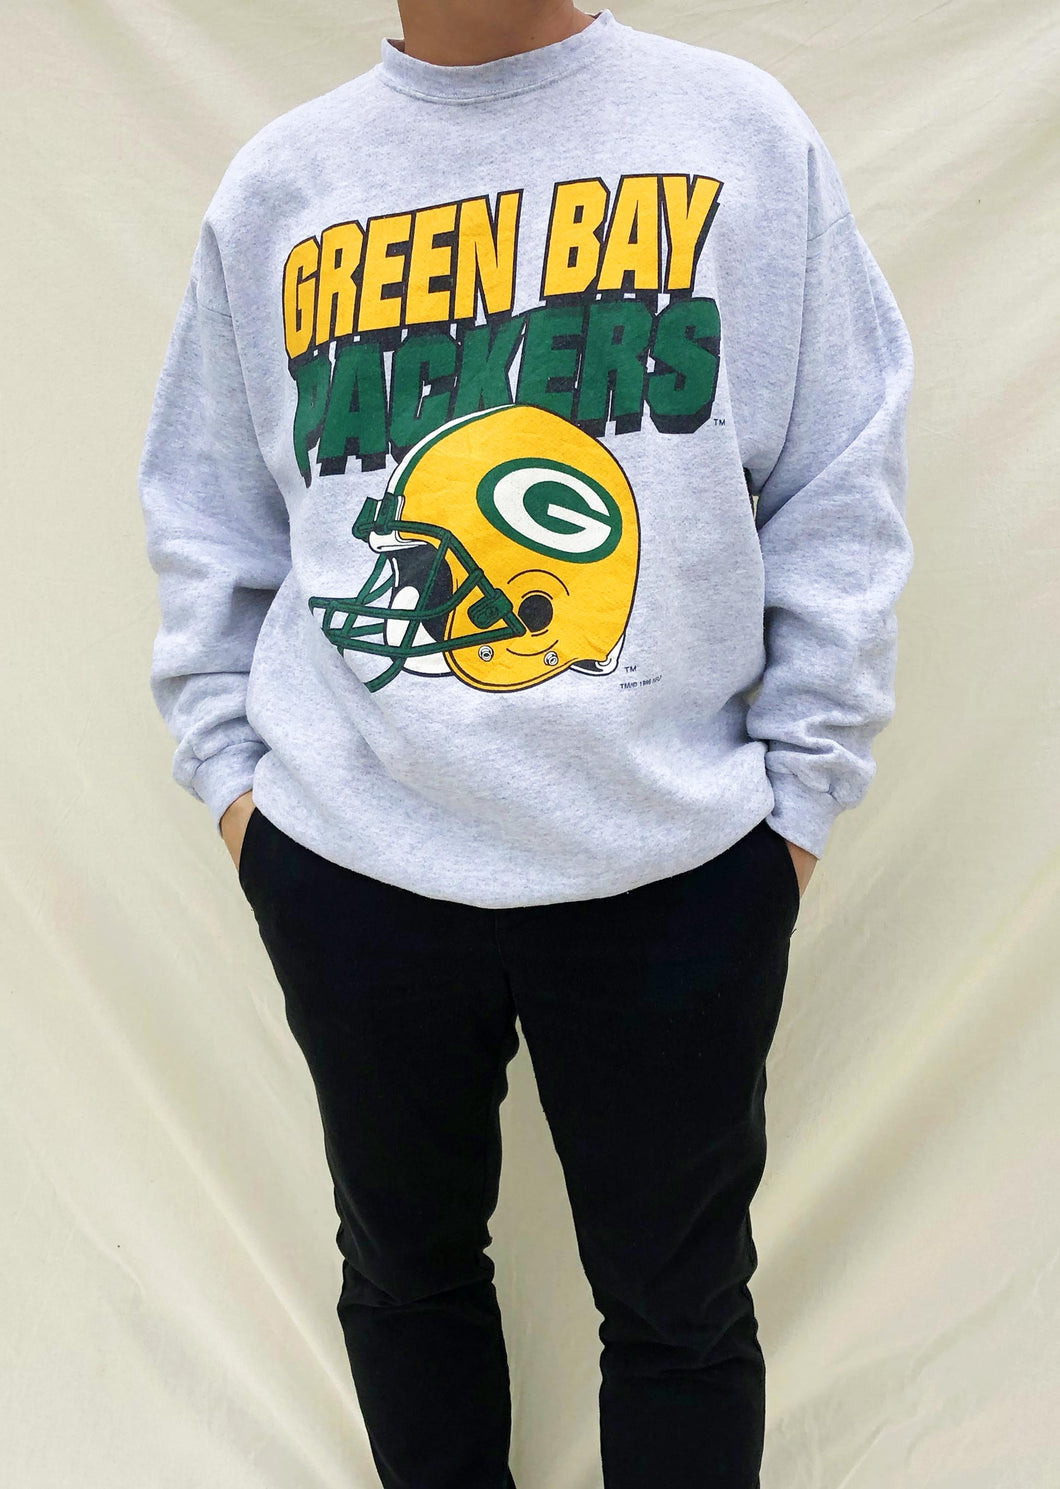 Vintage NFL Green Bay Packers '96 Sweater Grey (XL)